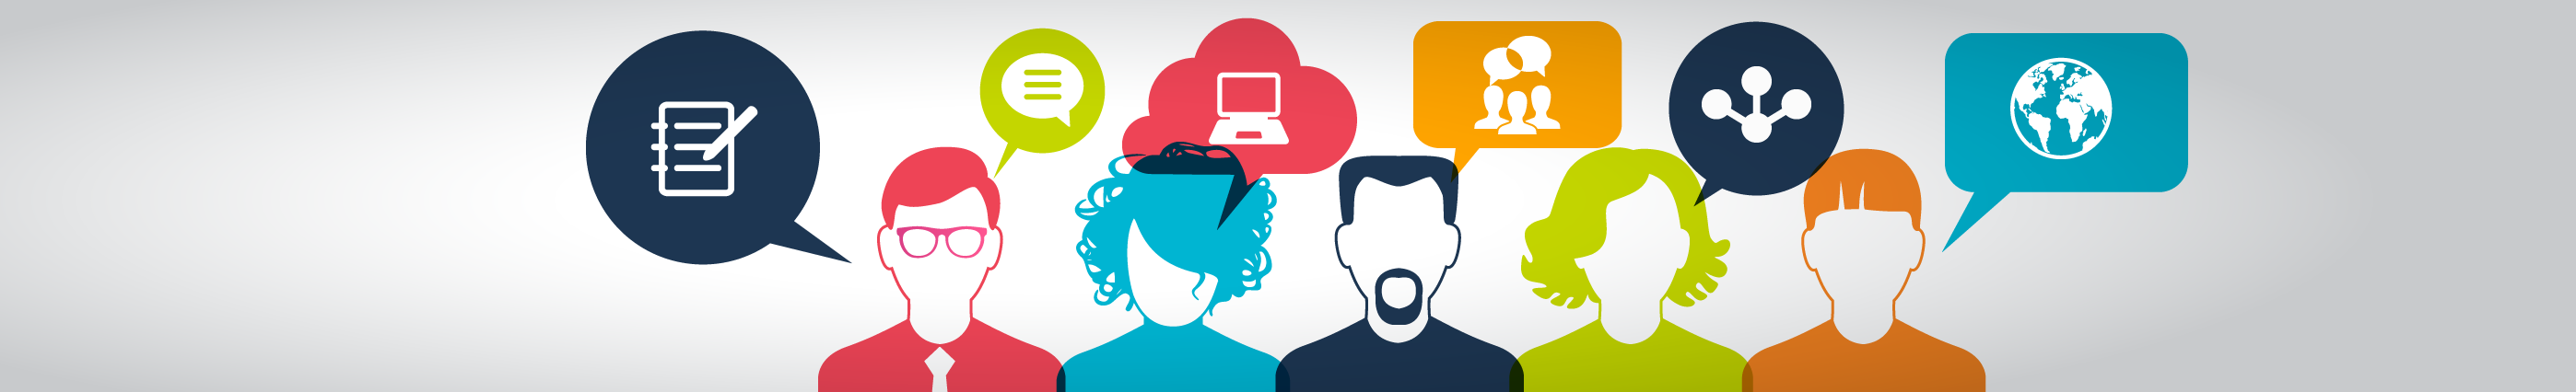 Concept of people communicate in a global network. Icons of people with speech bubbles, clouds and Interface icons.